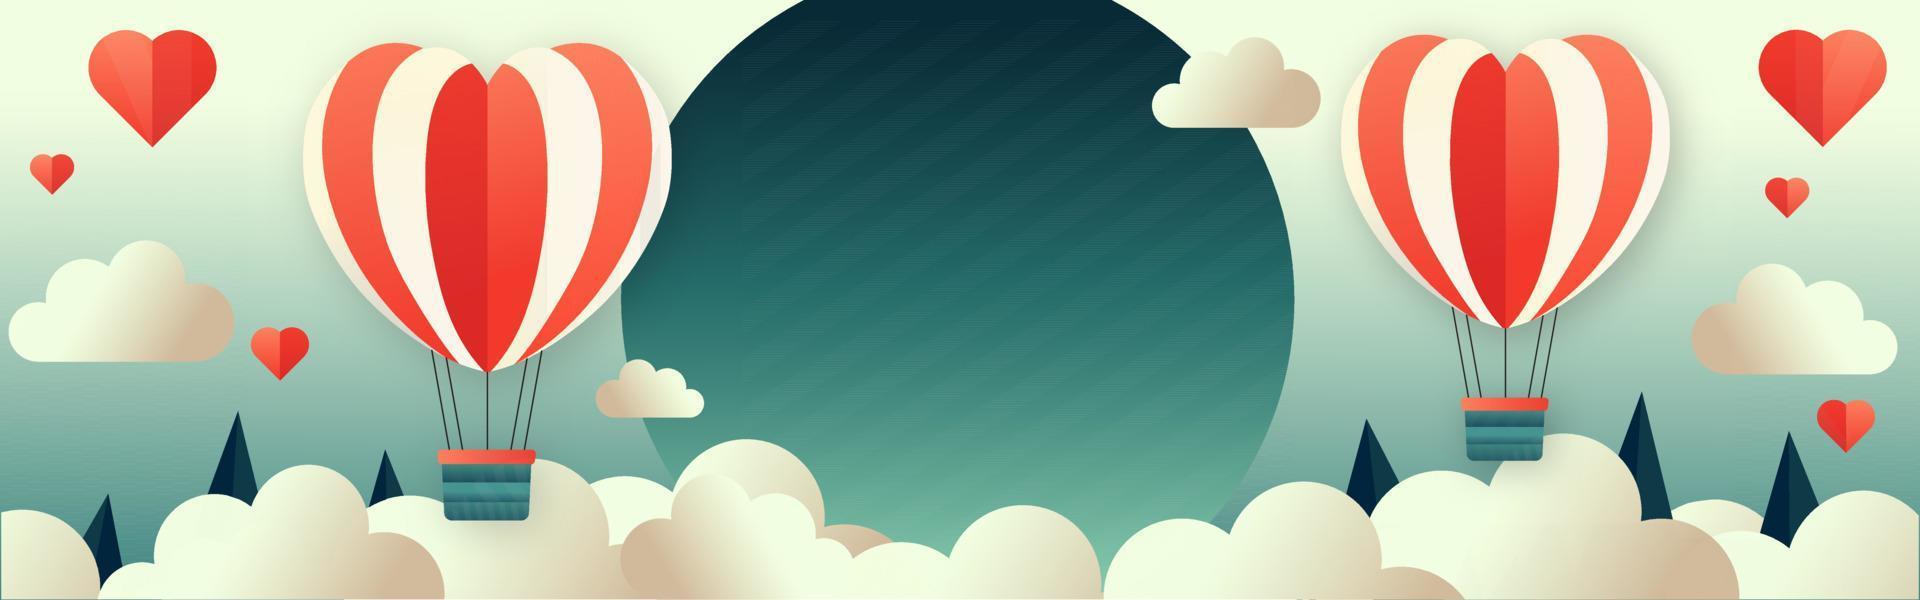 Illustration Of Heart Shape Balloons With Round Frame On Clouds, Conical Trees Background. Love Or Valentine's Day Concept. vector